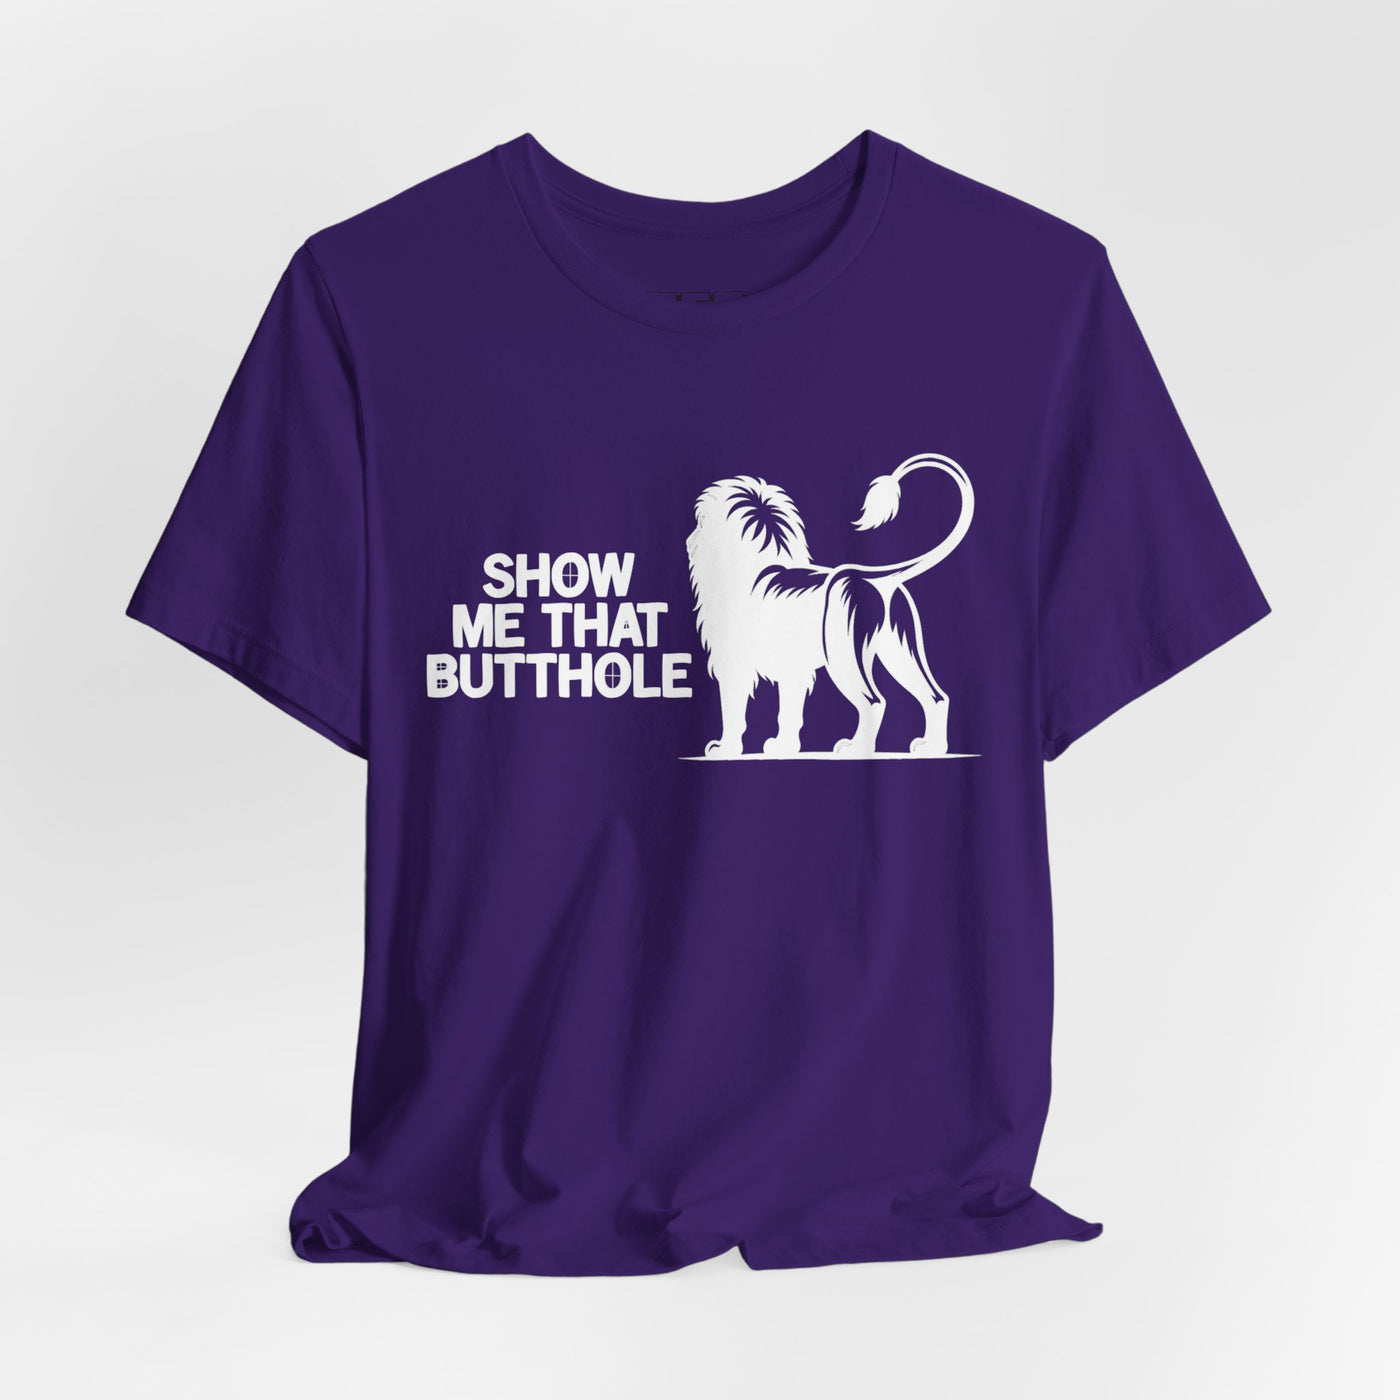 Show Me That Butthole